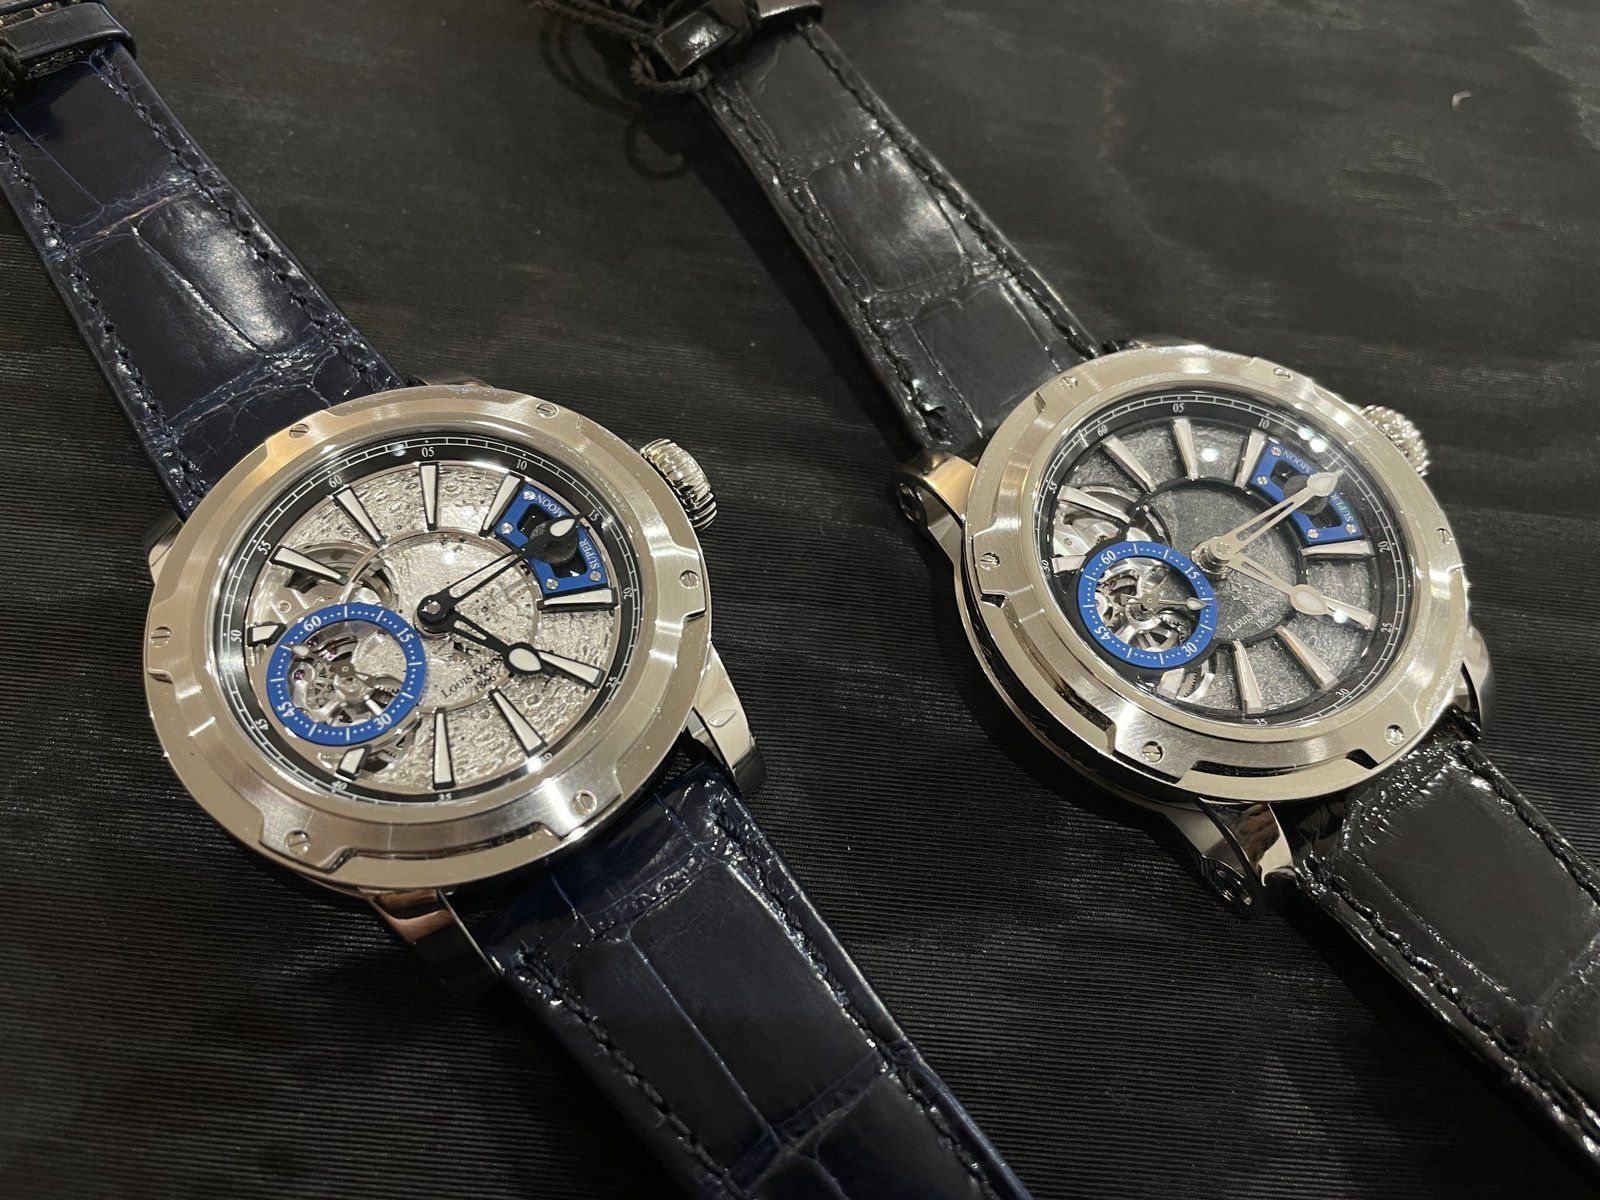 Louis Moinet - Watches and Wonders 2022